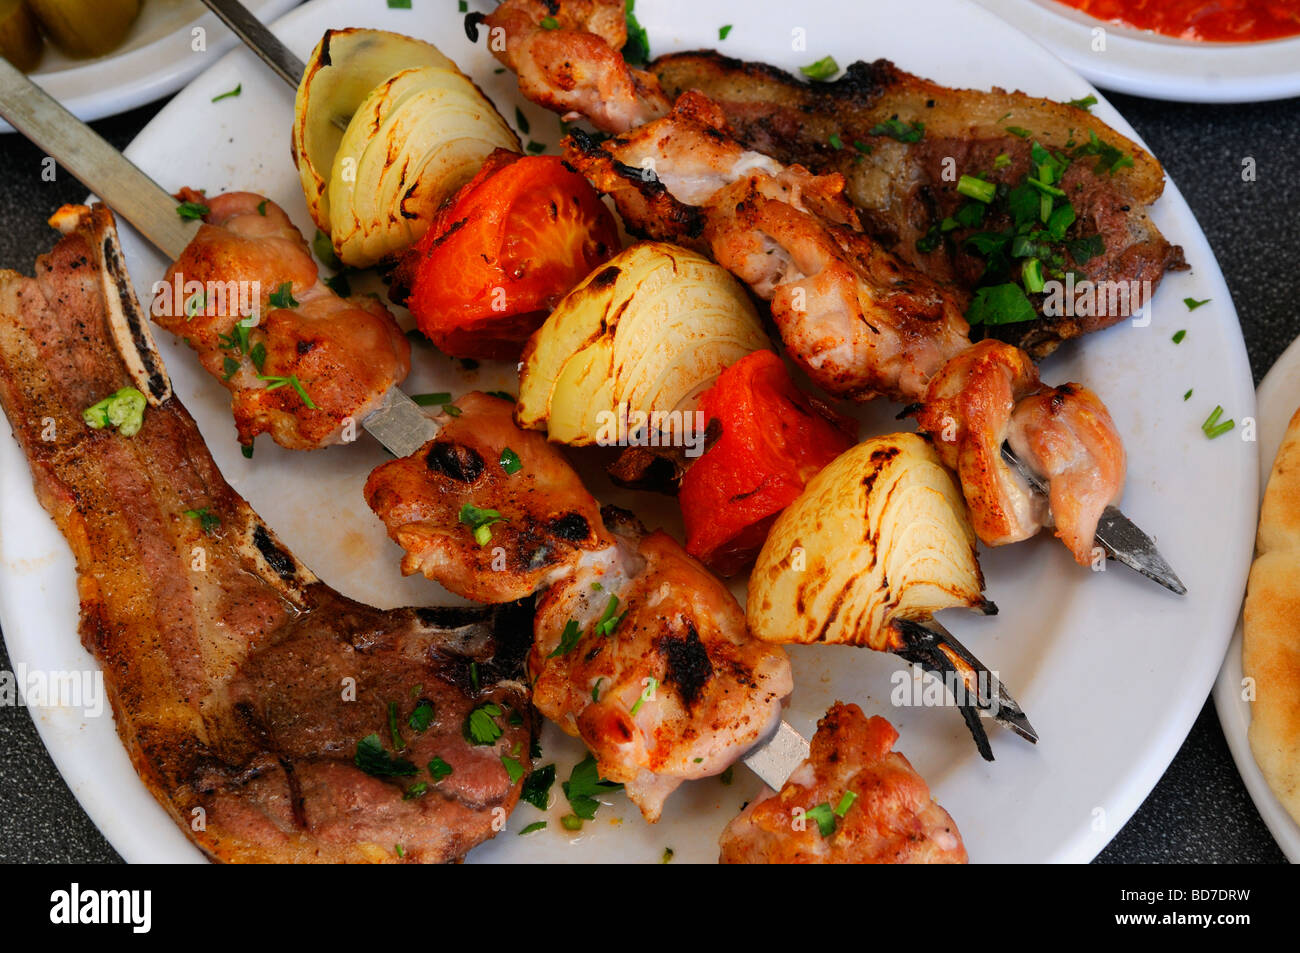 Grilling marinated shashlik preparing on a barbecue grill over charcoal.  Shashlik is a form of Shish kebab popular in Eastern Europe. Shashlyk (meaning  skewered meat) was originally made of lamb. Stock Photo